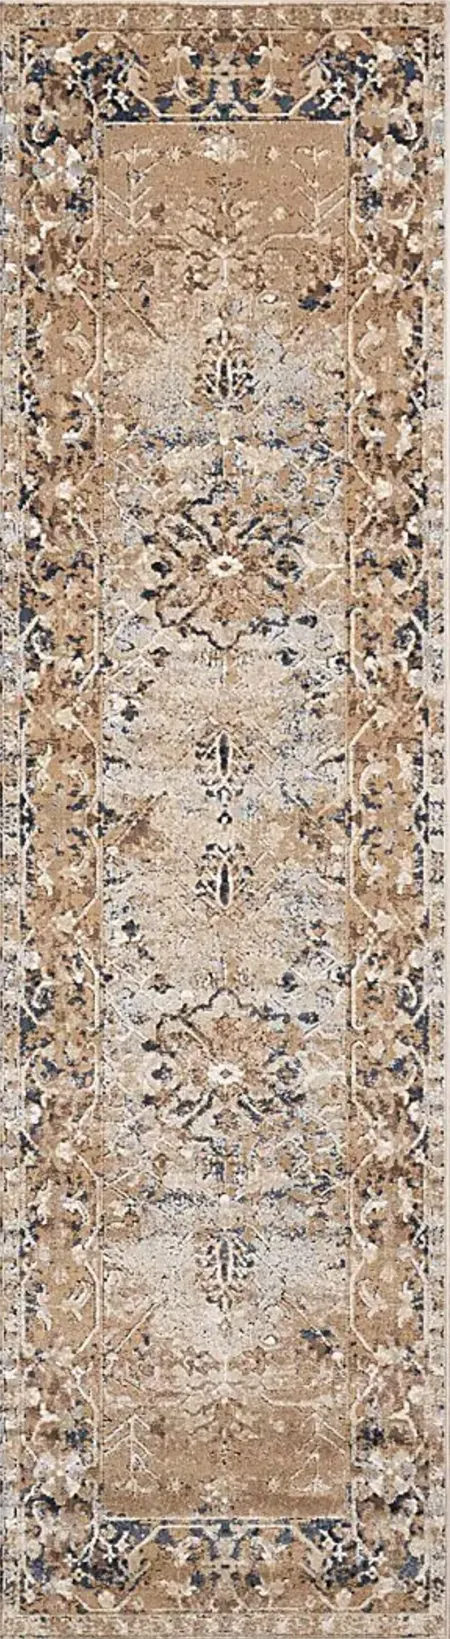 Dinias Taupe 2'2 x 7'7 Runner Rug